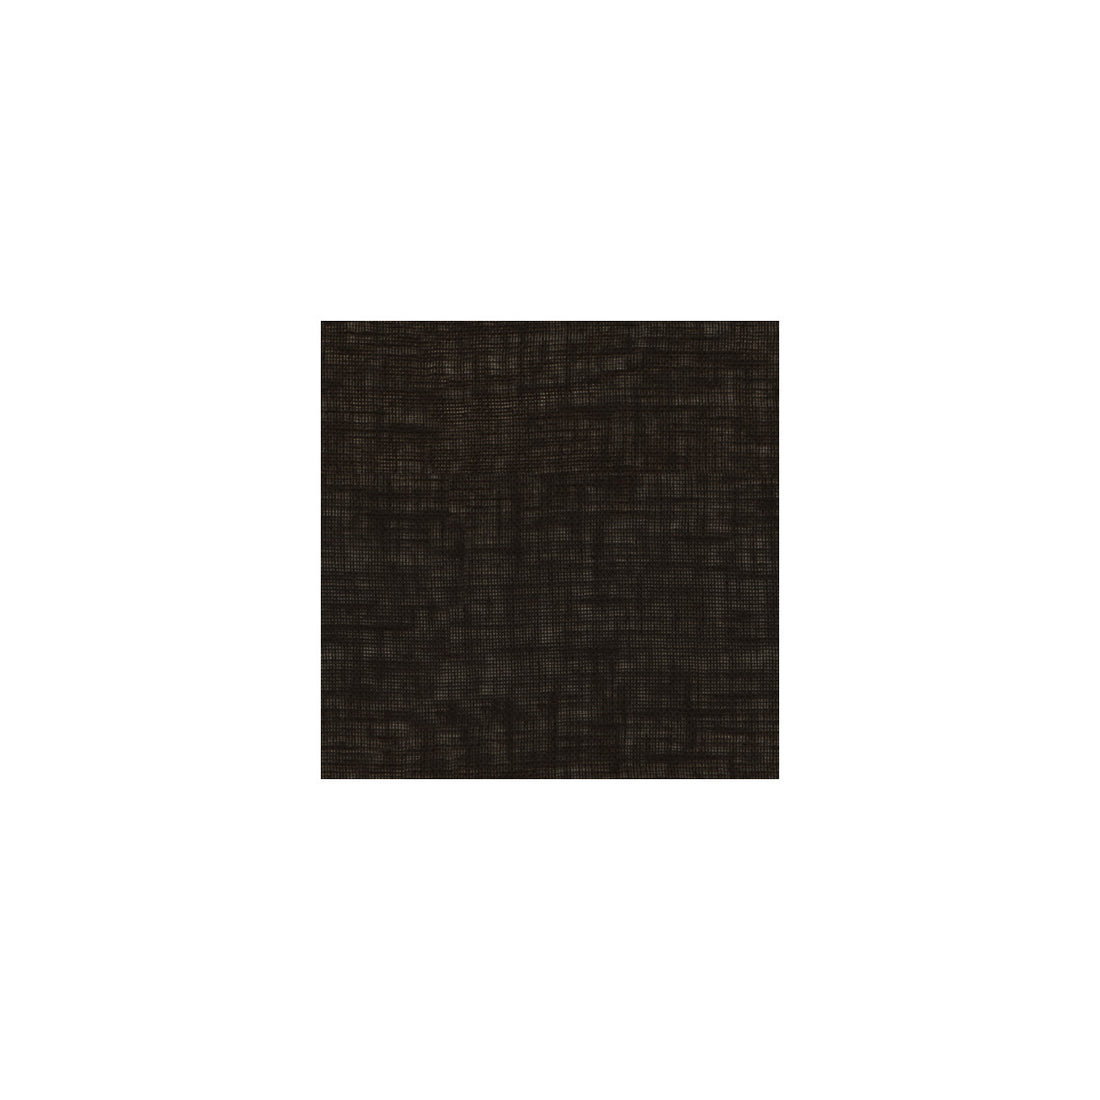 Barra fabric in black color - pattern PF50226.990.0 - by Baker Lifestyle